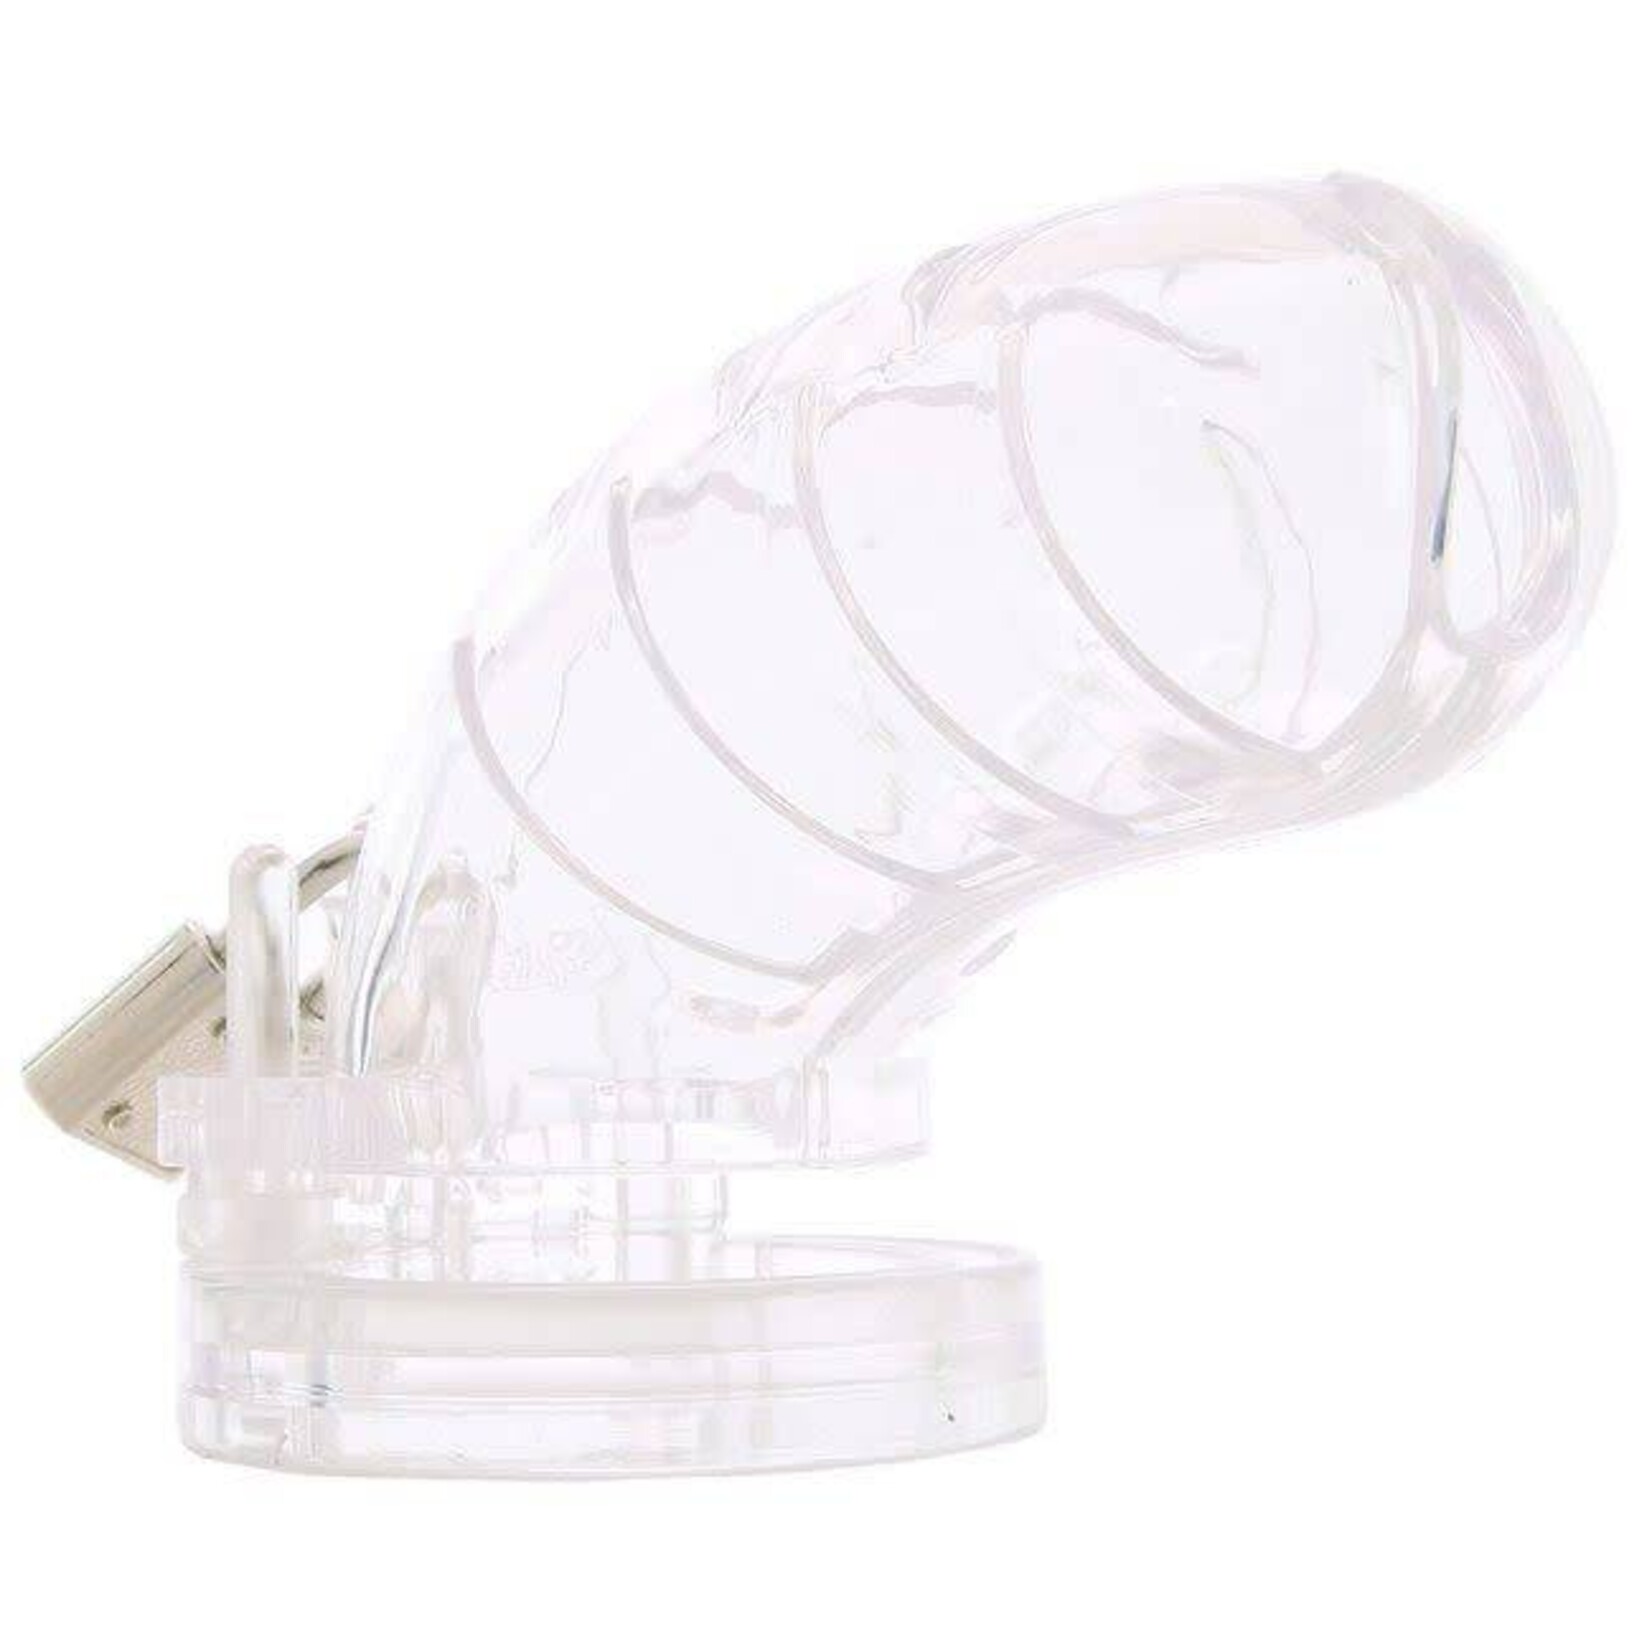 Shots America Man|Cage 04 4.5" Chastity Device